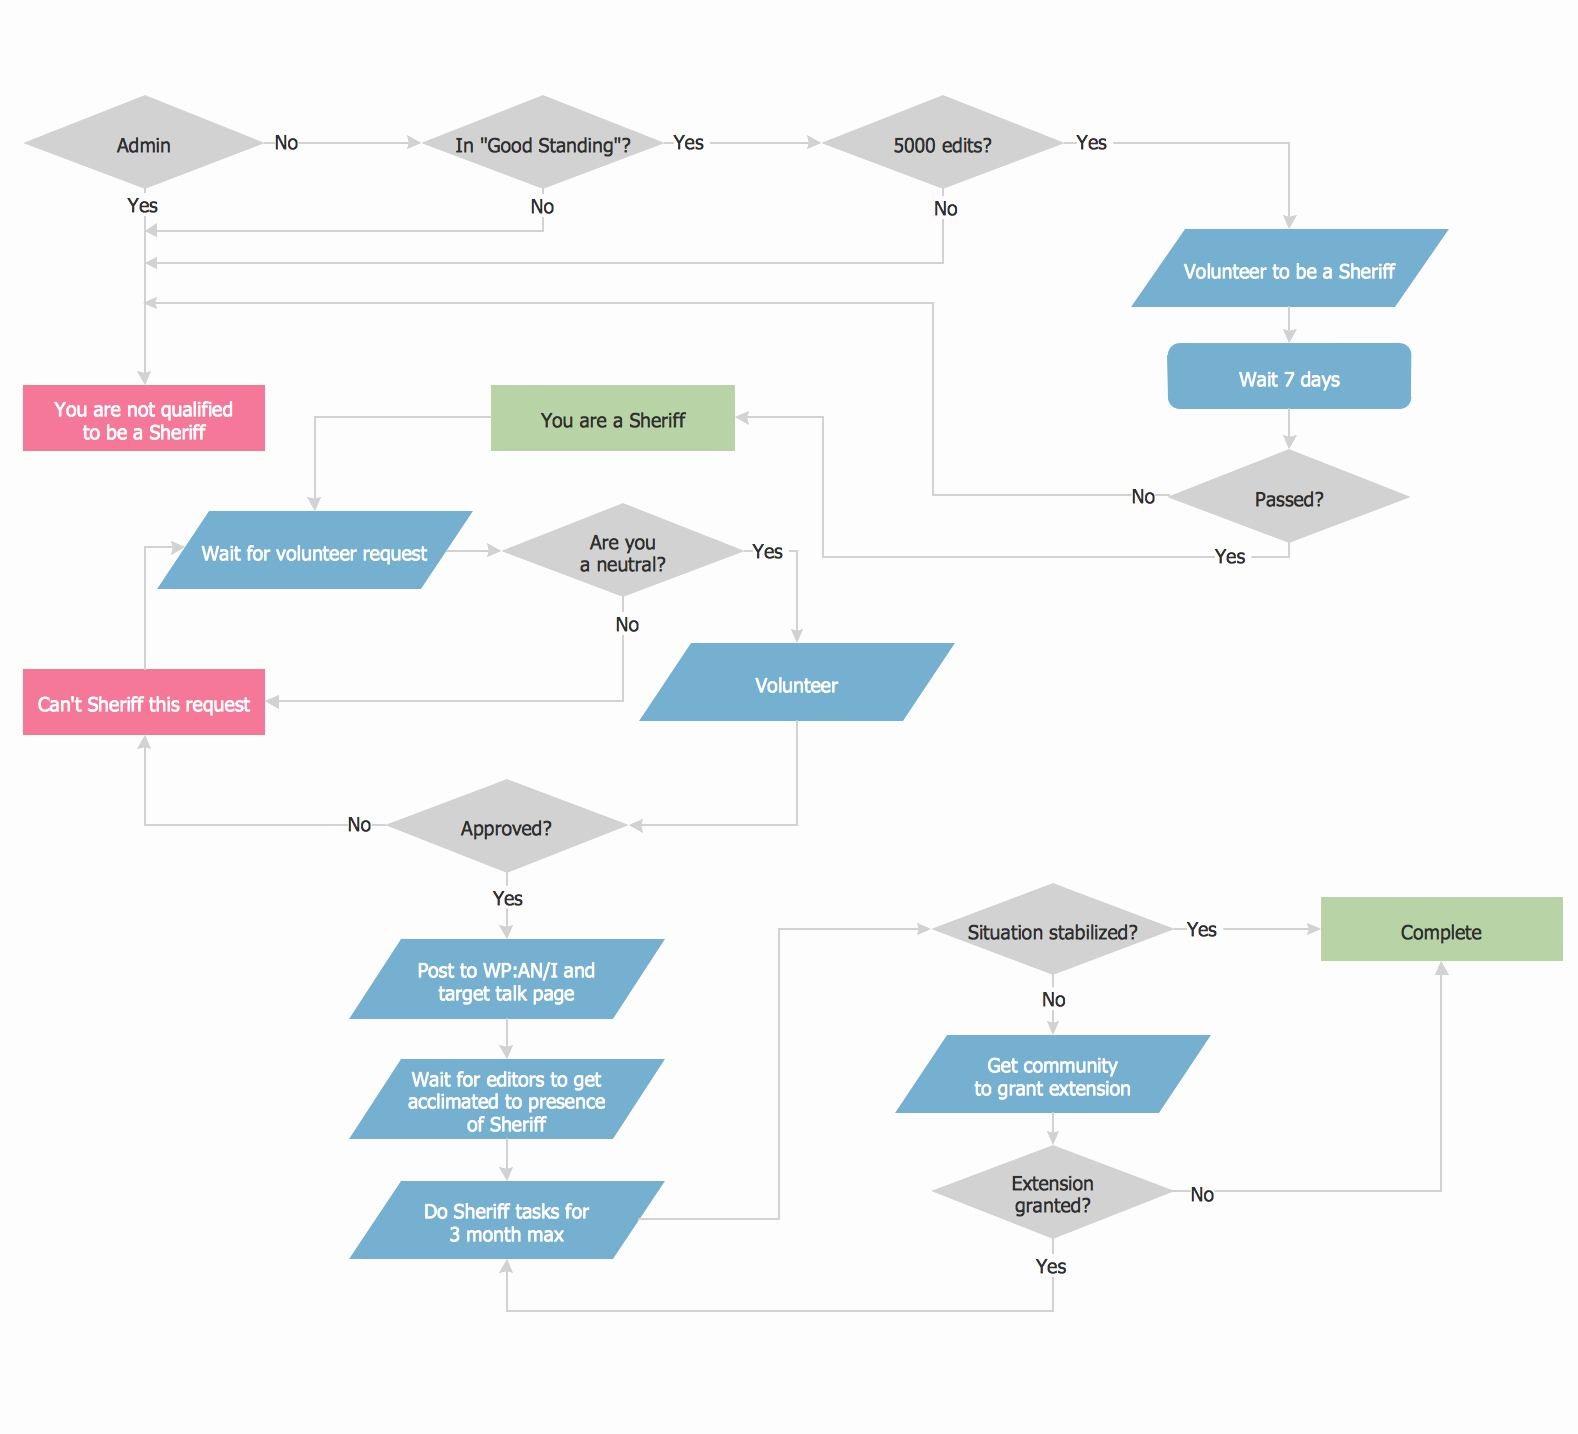 Process Flow Chart Examples